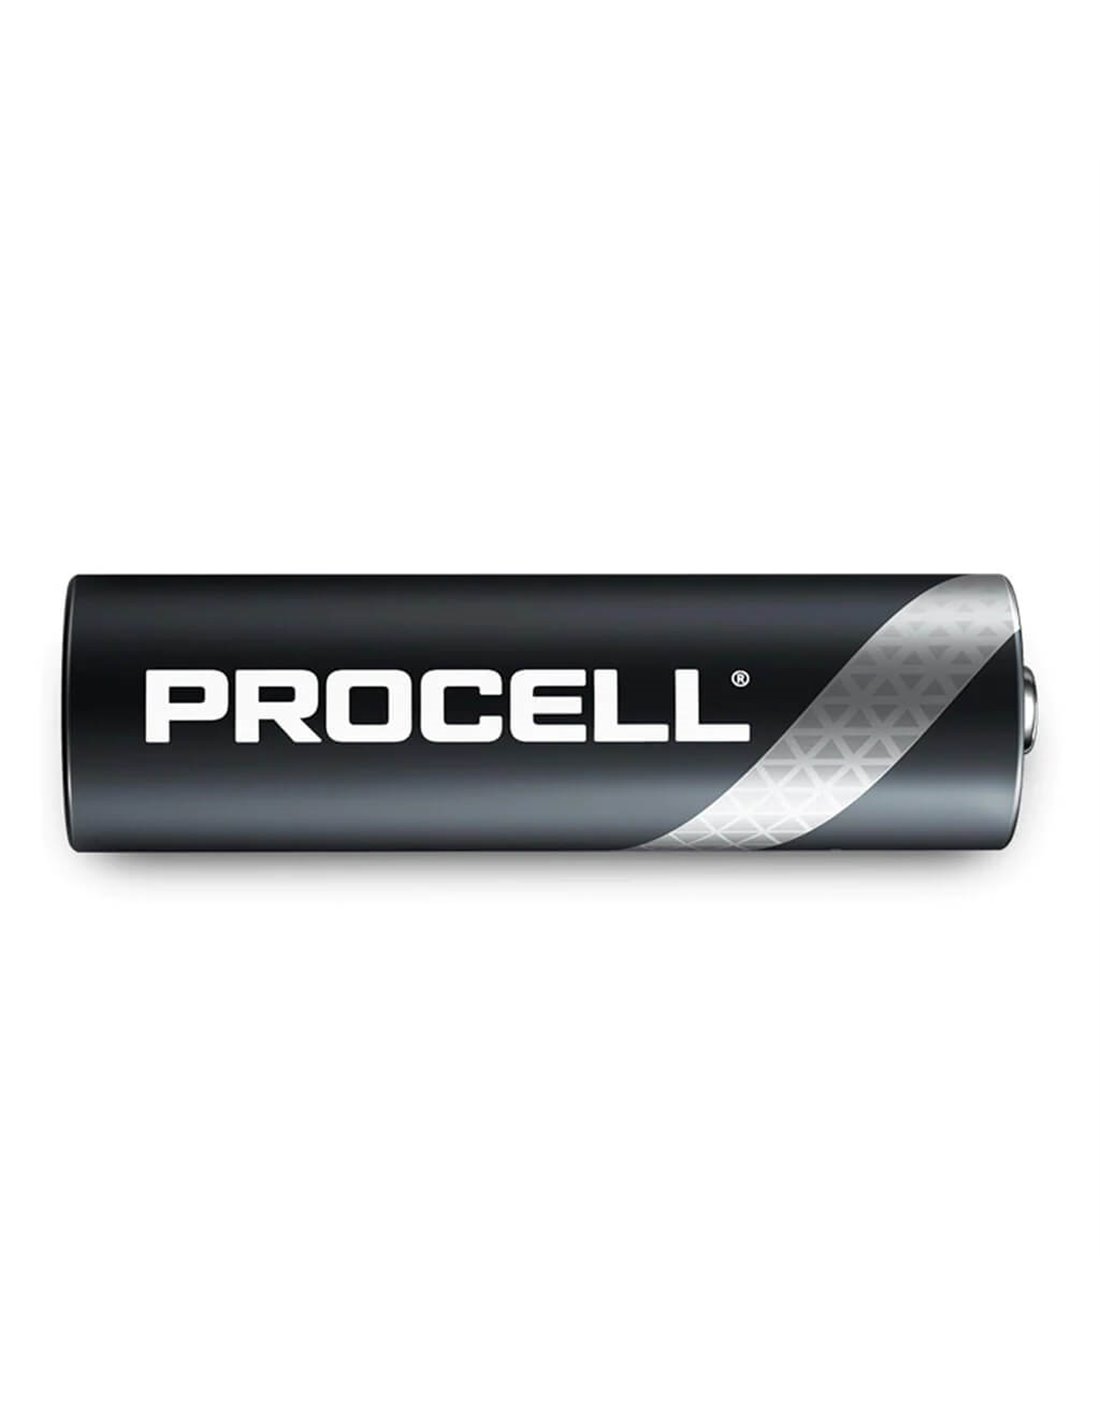 Duracell AA Procell Alkaline Batteries model PC1500 - Non Rechargeable